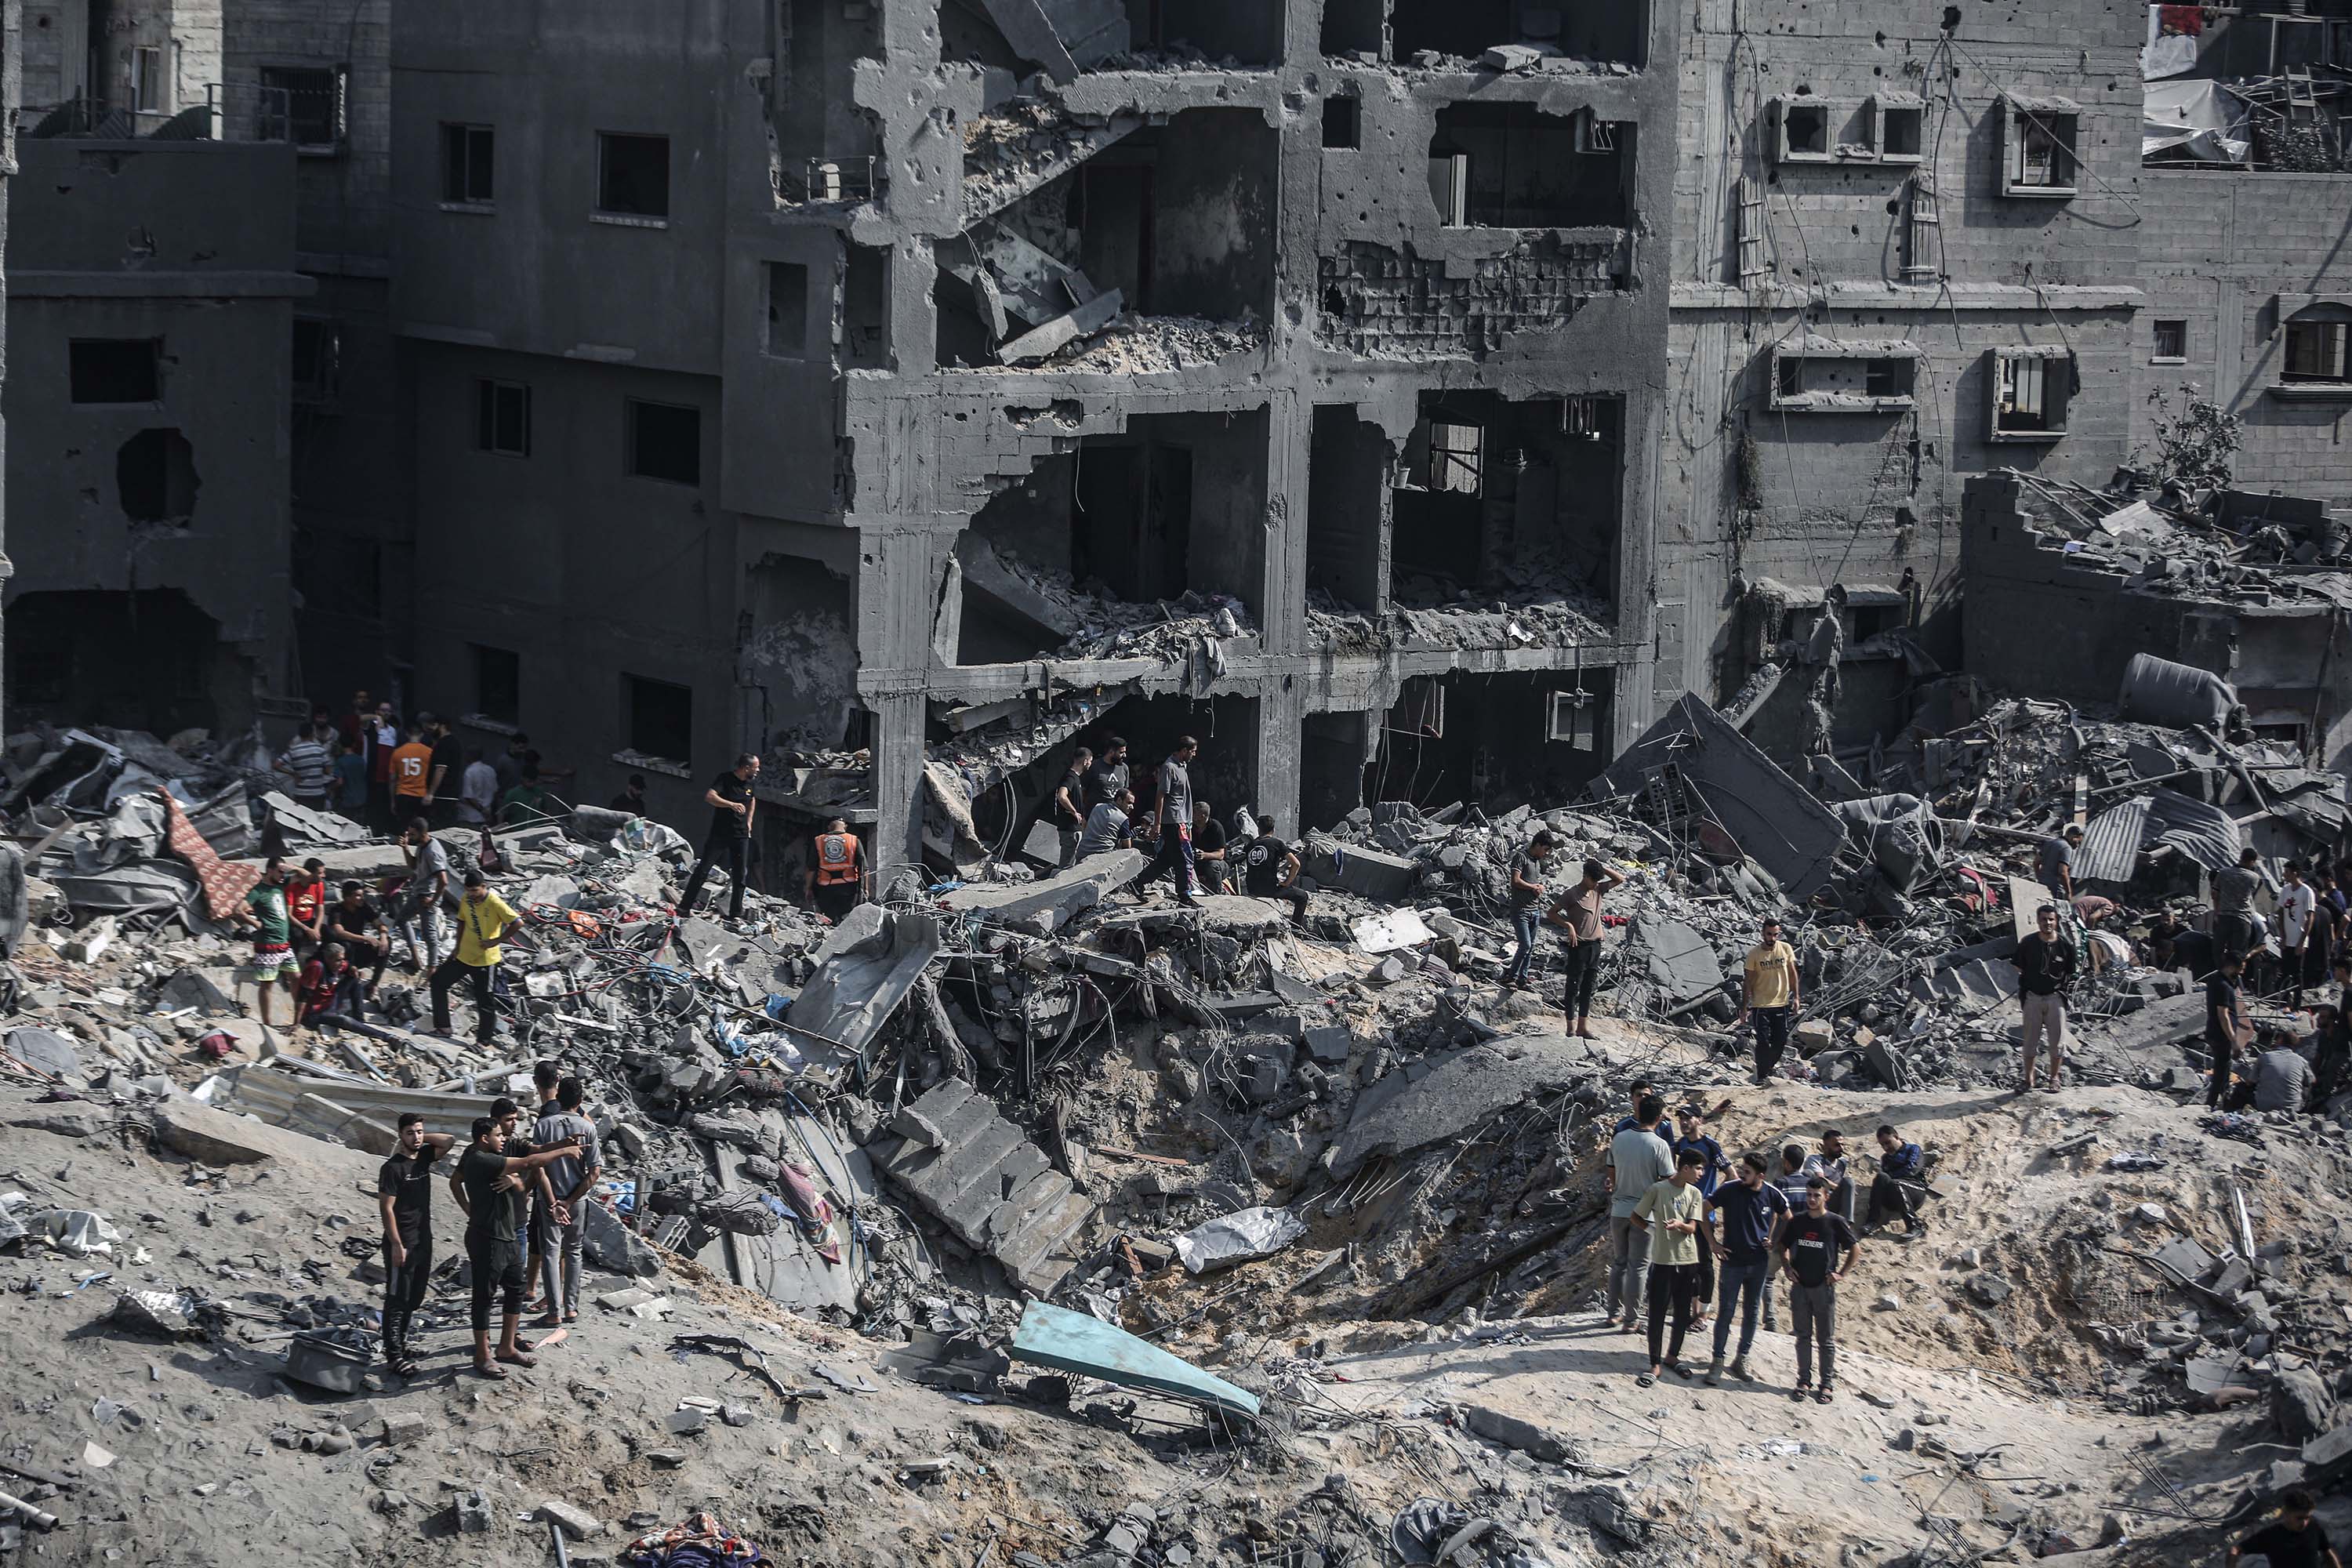 Palestinians conduct a search and rescue operation after the second bombardment of the Israeli army in the last 24 hours at Jabalya refugee camp in Gaza City, Gaza on November 1.